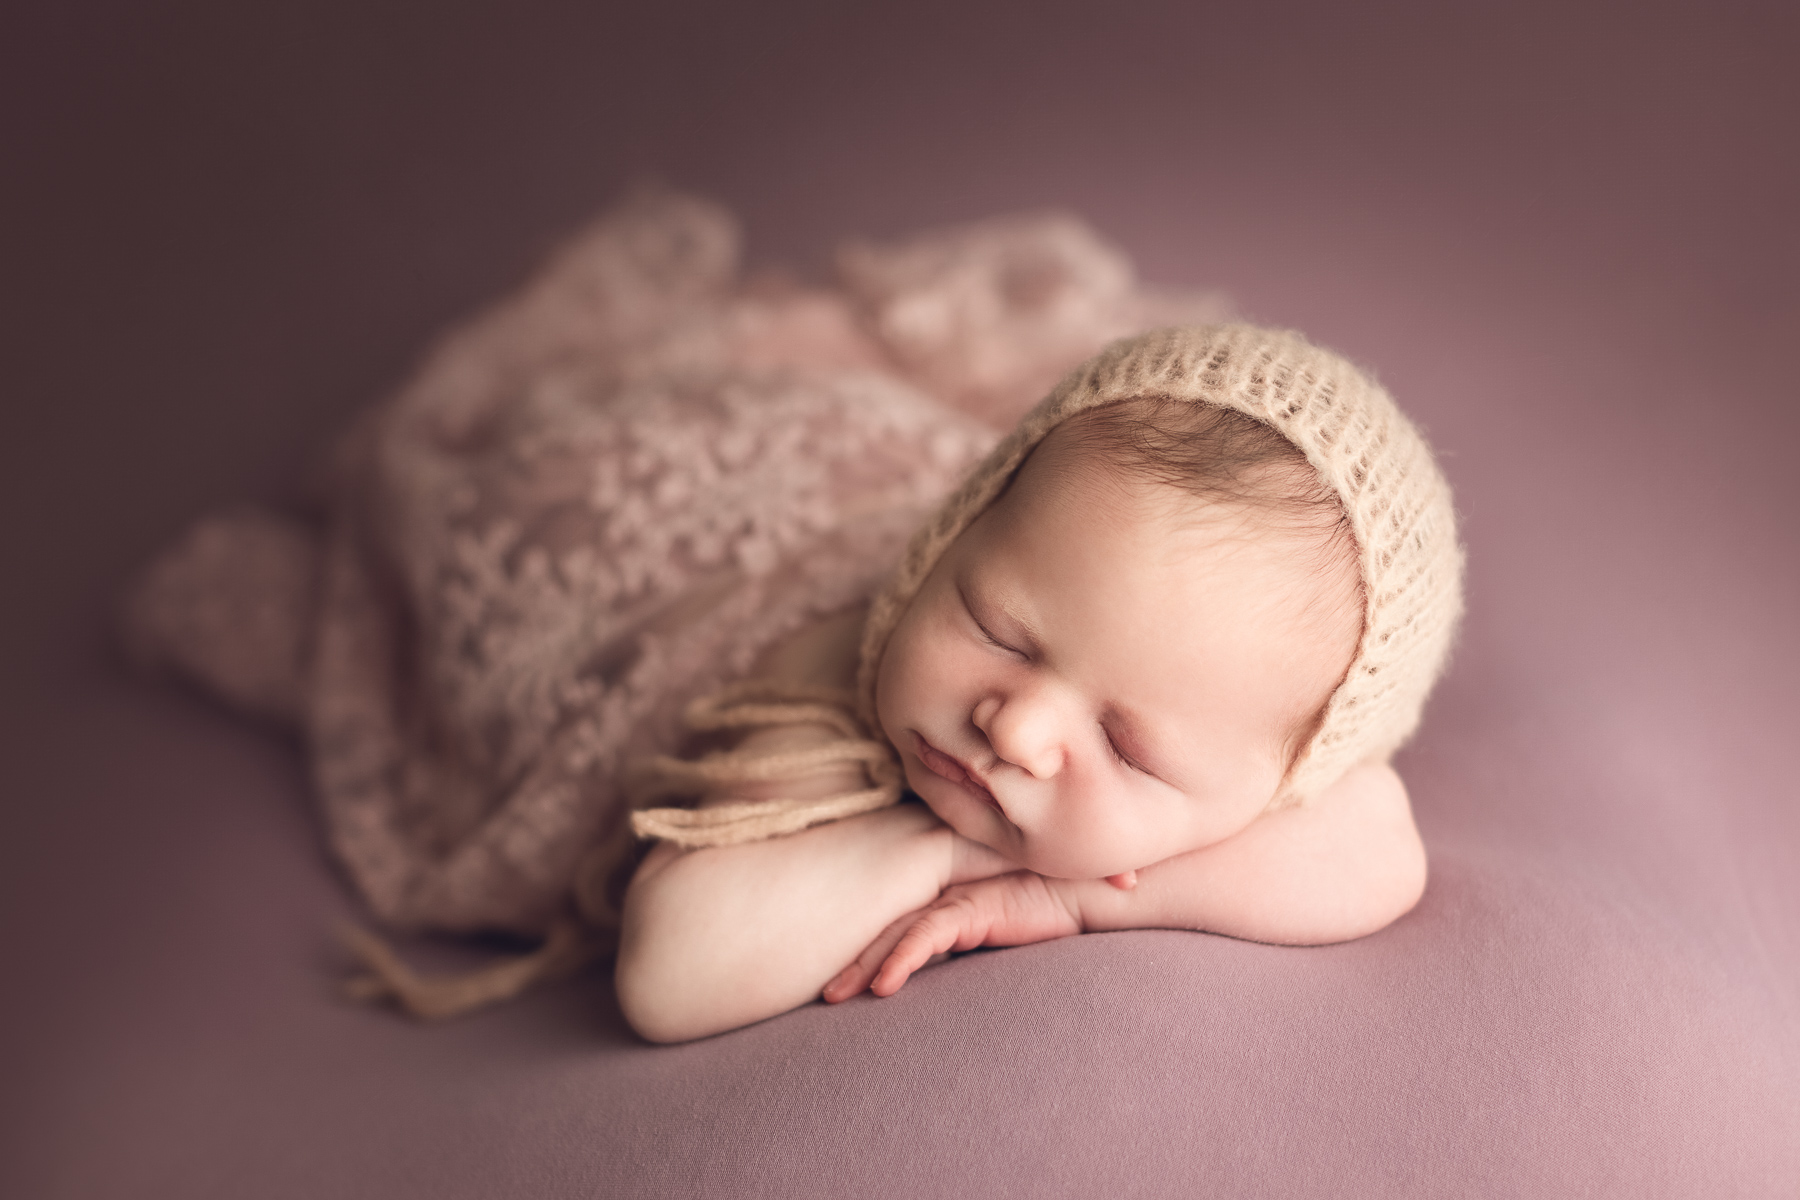 newborn photography classic package sample - baby girl sleeping on a pink fabric